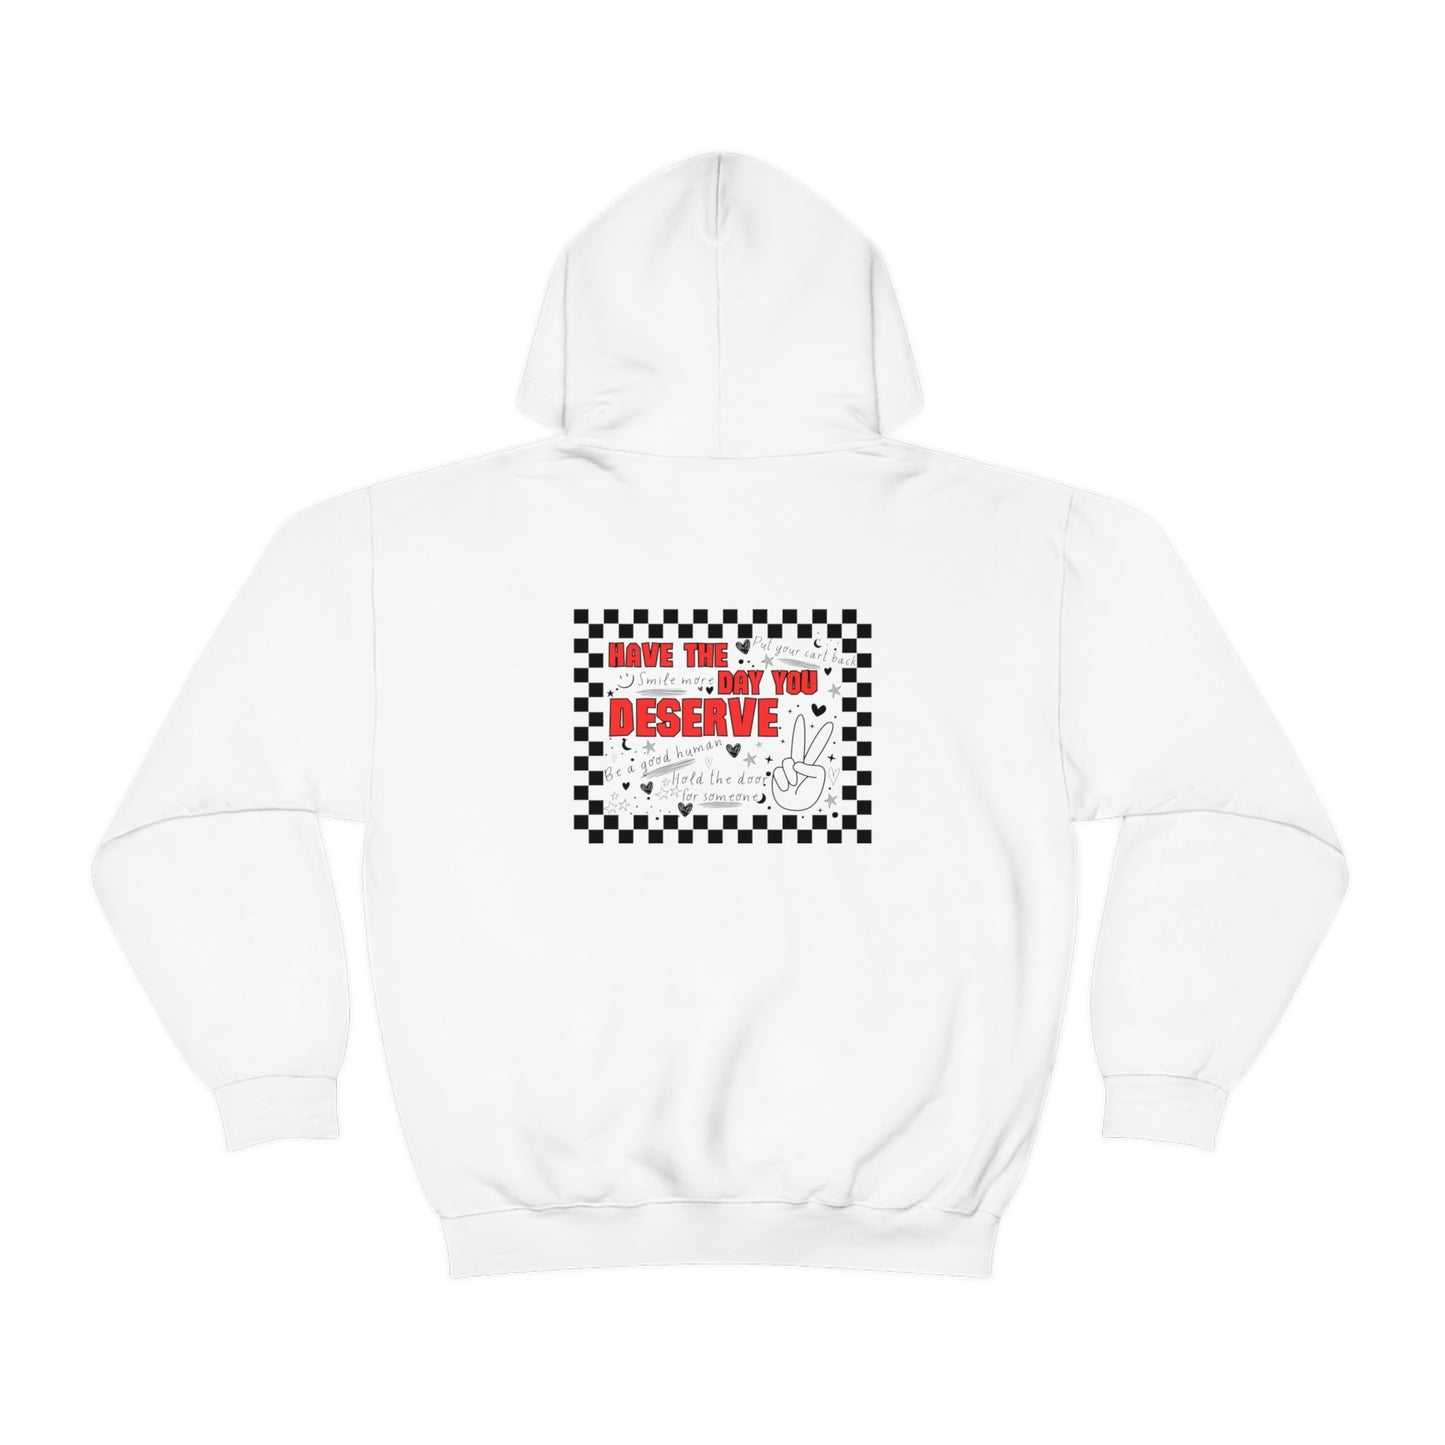 Have The Day You Deserve | Smile More | Put Your Cart Back | Be A Good Human | Hold The Door | Checkered Hoodie | Gift Men Woman Female Male